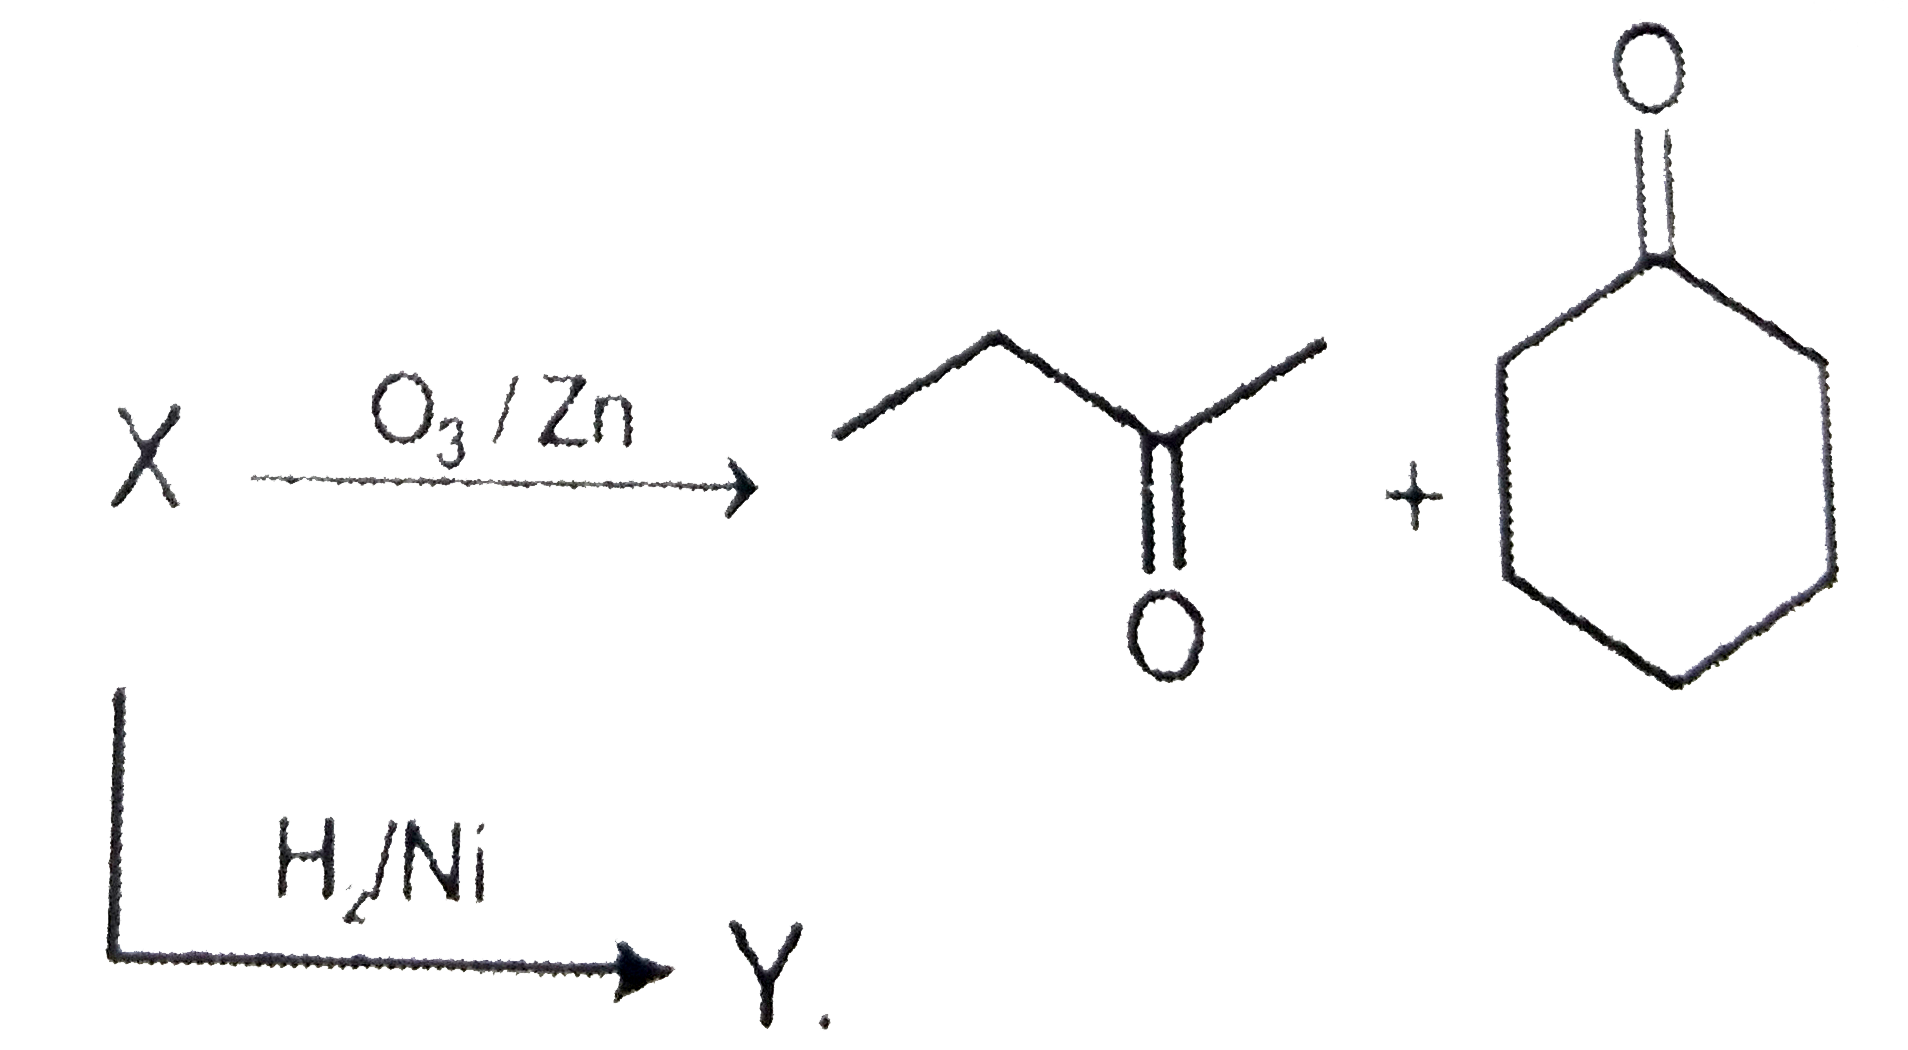 The IUPAC name of compound Y is :